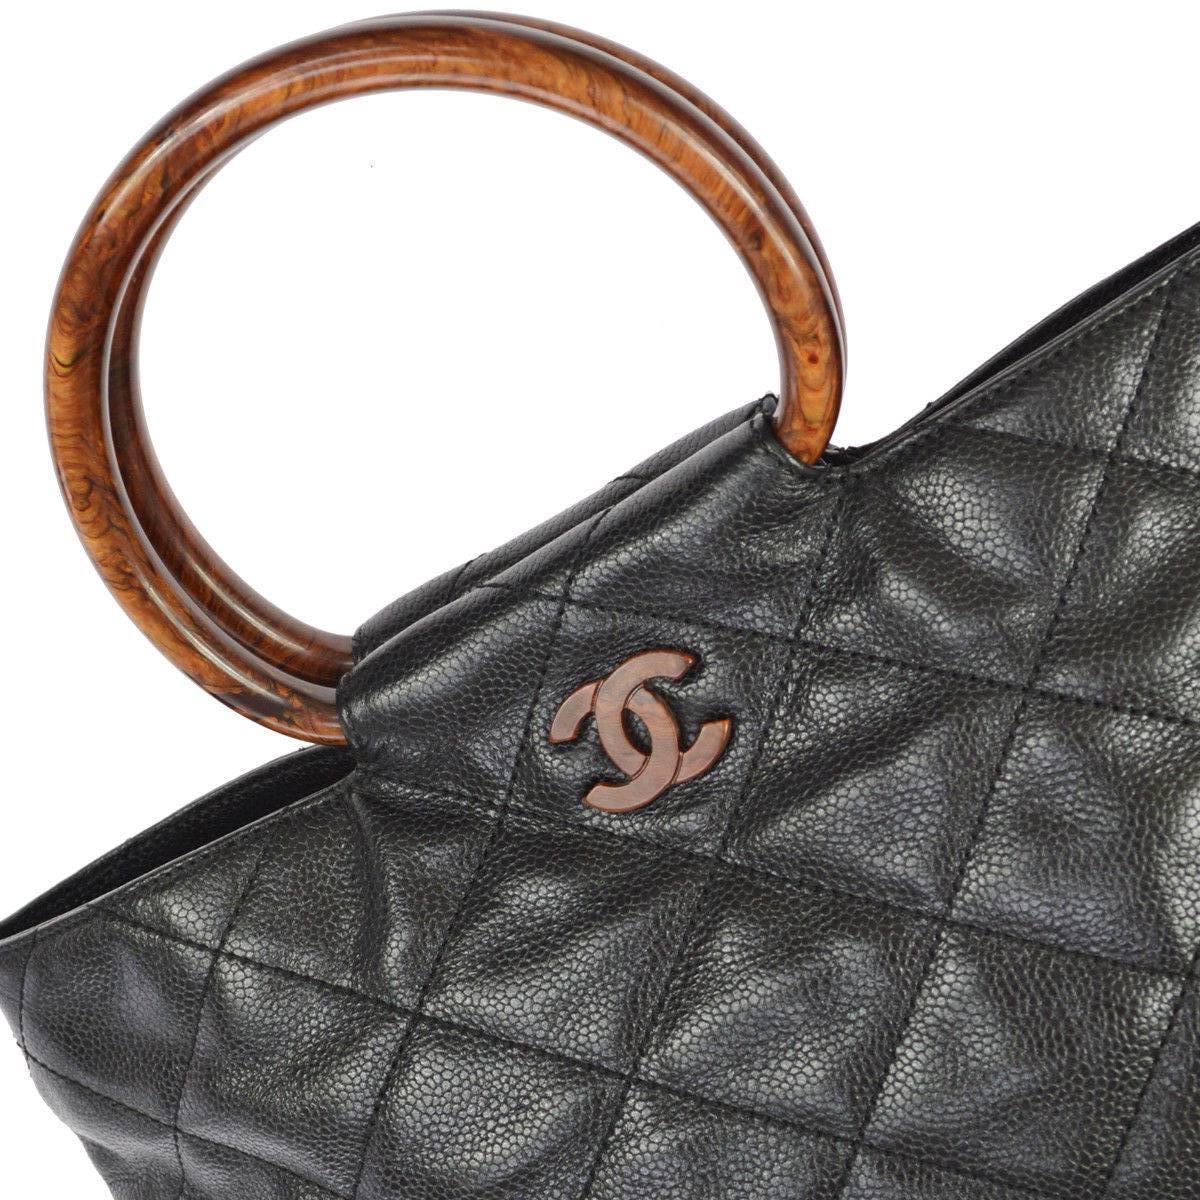 Chanel Black Leather Cross Stitch Kelly Style Brown Tortoise Top Handle Satchel Bag

Leather
Leather lining
Date code present
Made in Italy
Handle drop 4